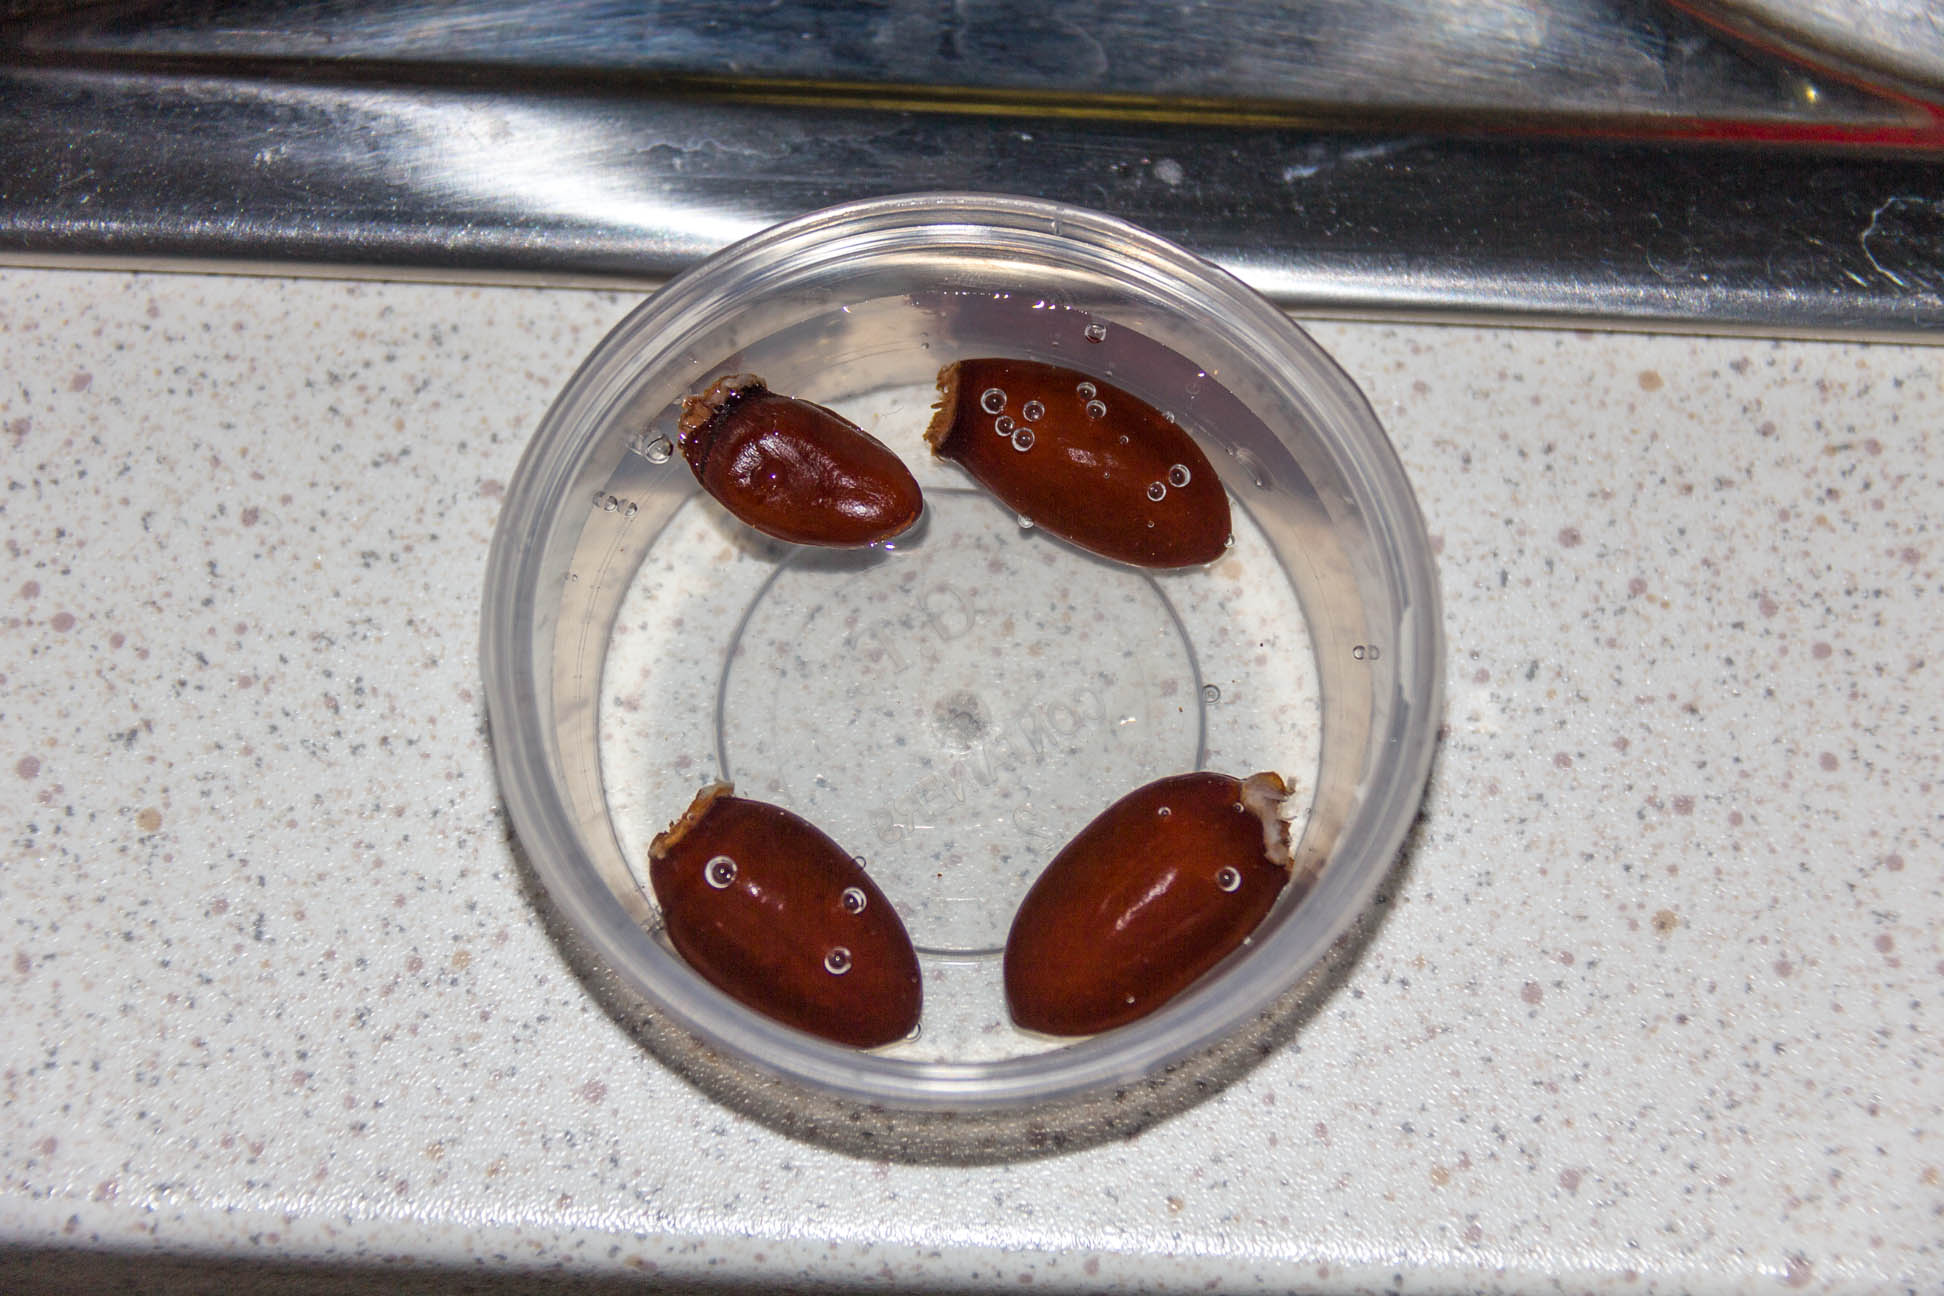 01/01/15 Day 1: Lychee seed germination experimentation Put 4 fresh seeds into a cup of water